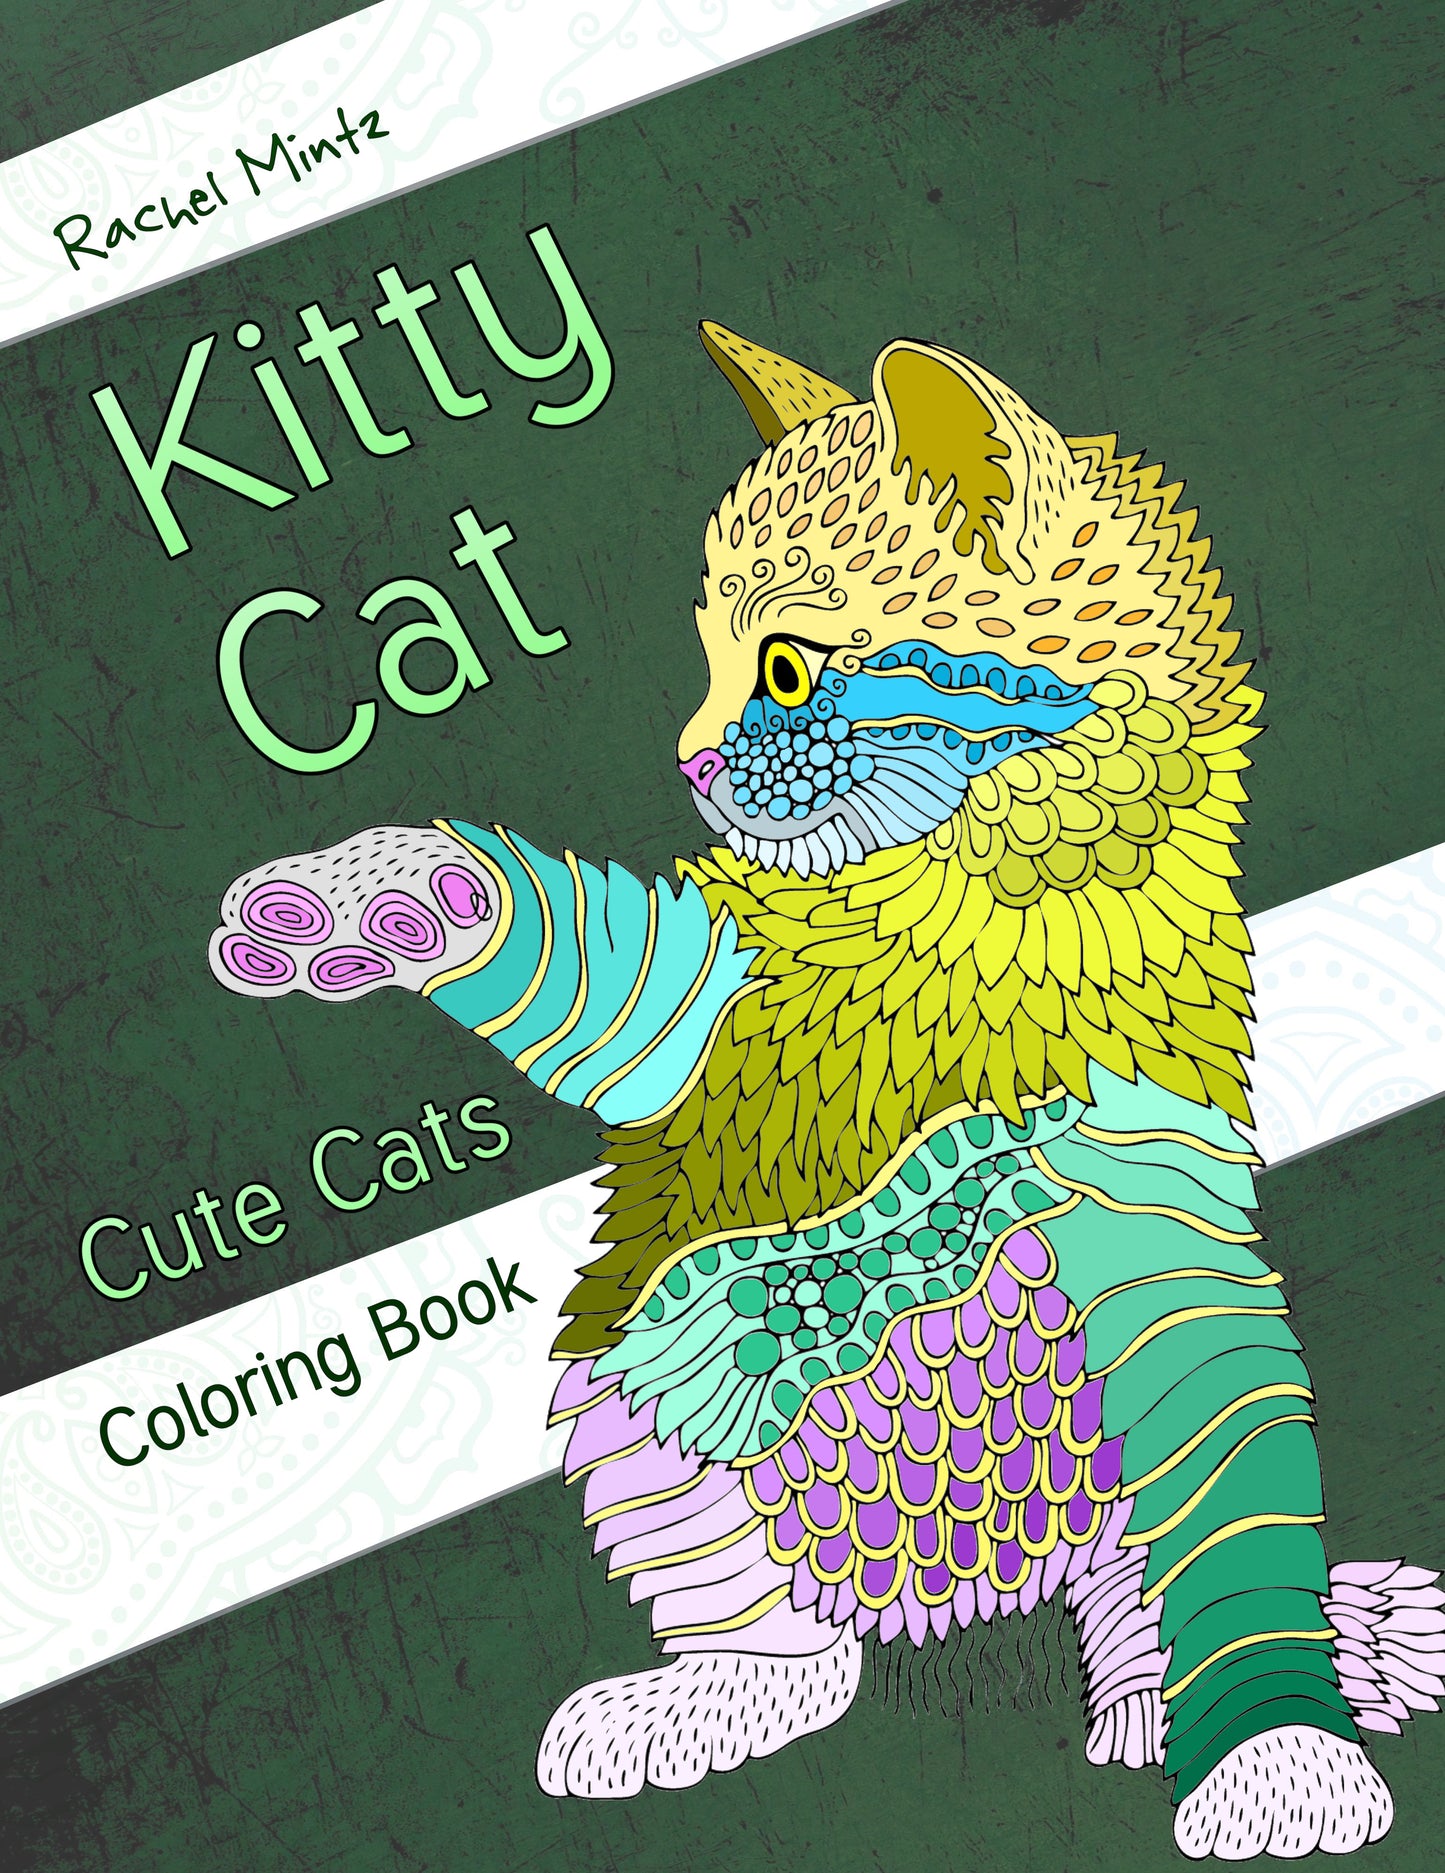 Kitty Cat - Cute Cats & Kittens Coloring Book